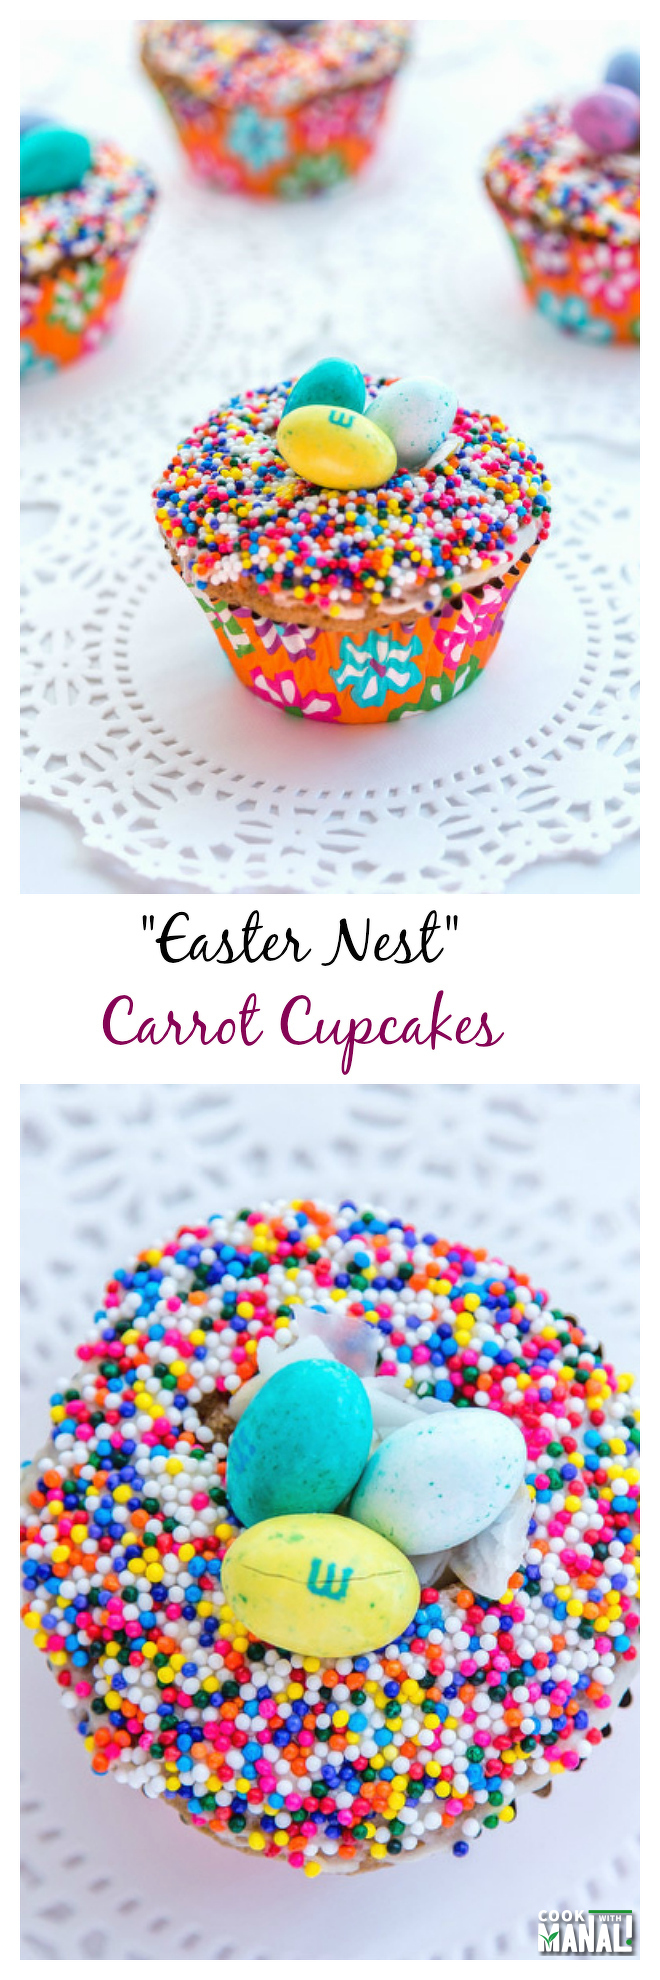 Easter-Nest-Carrot-Cupcakes-Collage